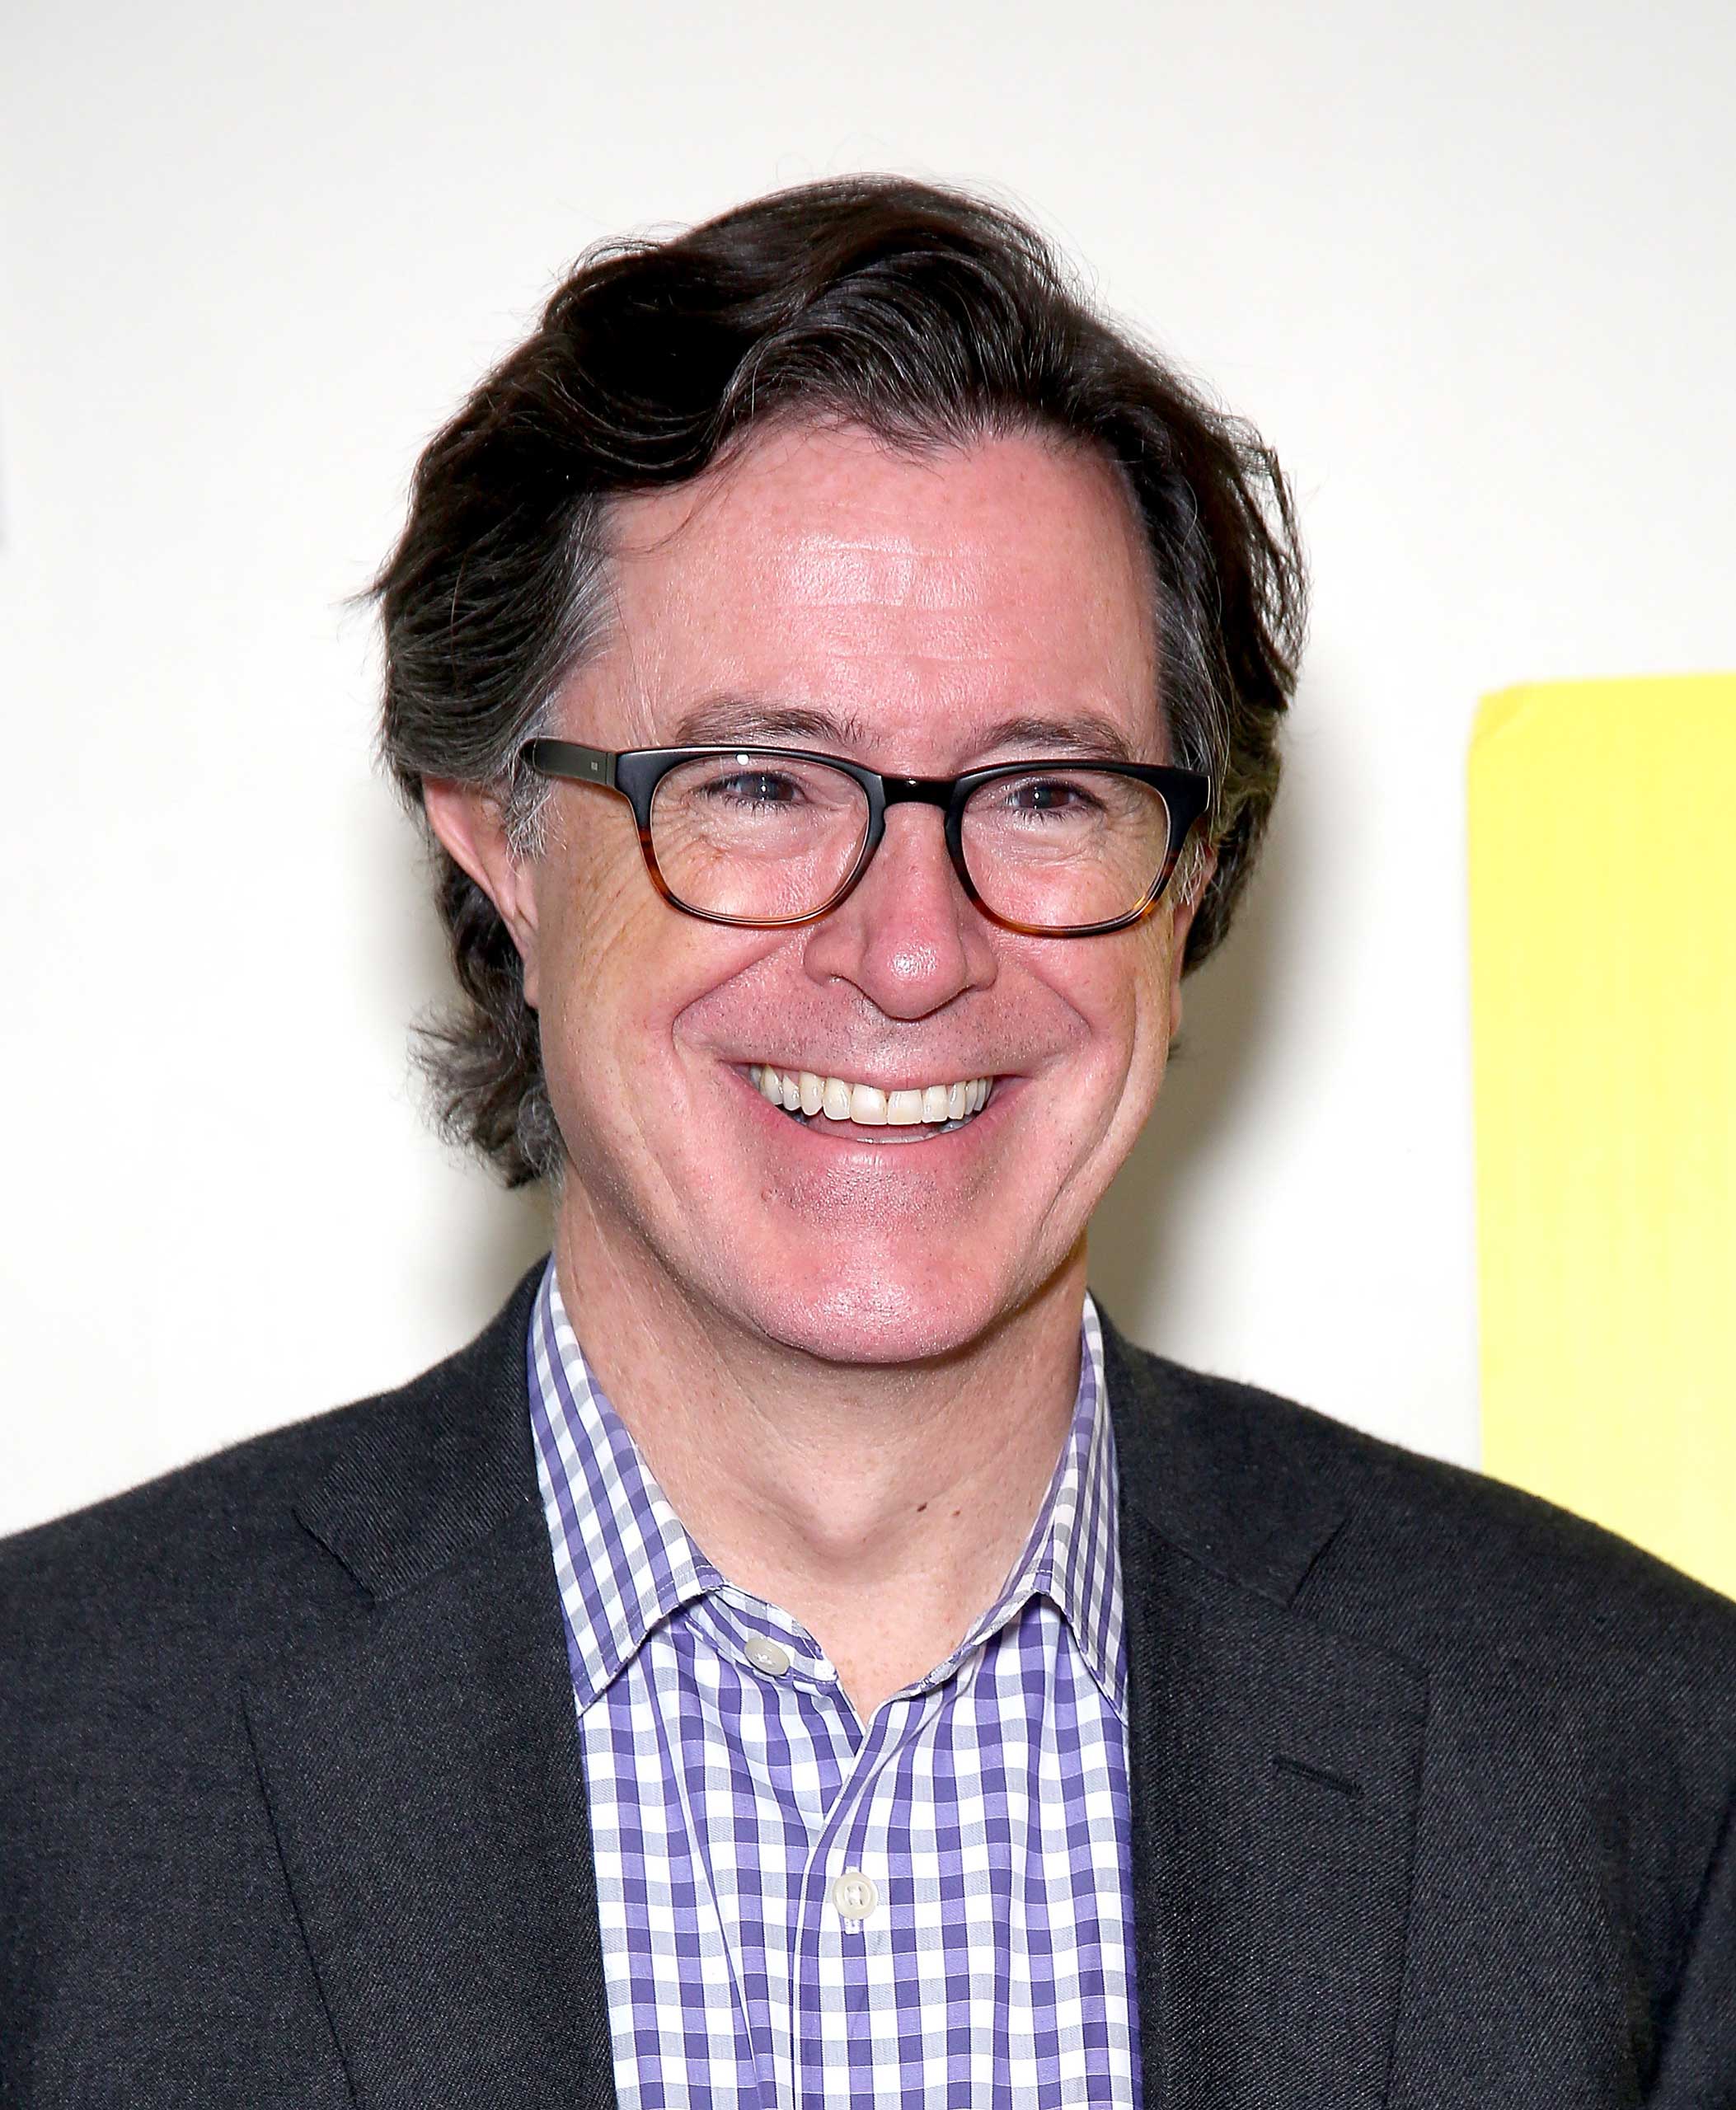 Stephen Colbert attends the 2015 Monclair Film Festival, In Conversation With Richard Gere Hosted By Stephen Colbert at the Wellmont Theatre in Montclair, N.J. on May 2, 2015.